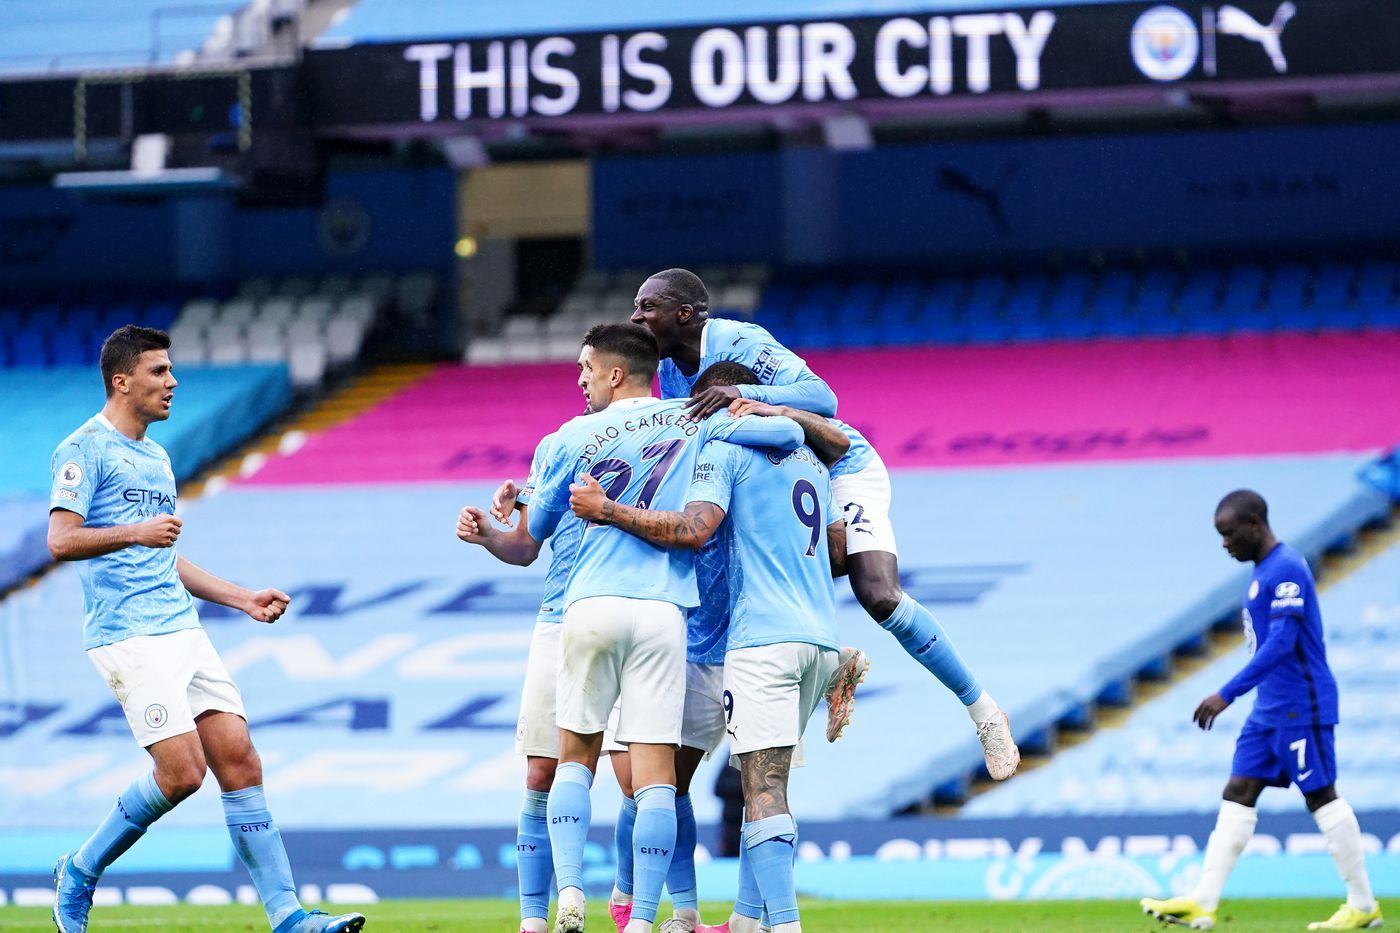 BREAKING: MANCHESTER CITY OFFICIALLY PREMIER LEAGUE CHAMPIONS and Blue